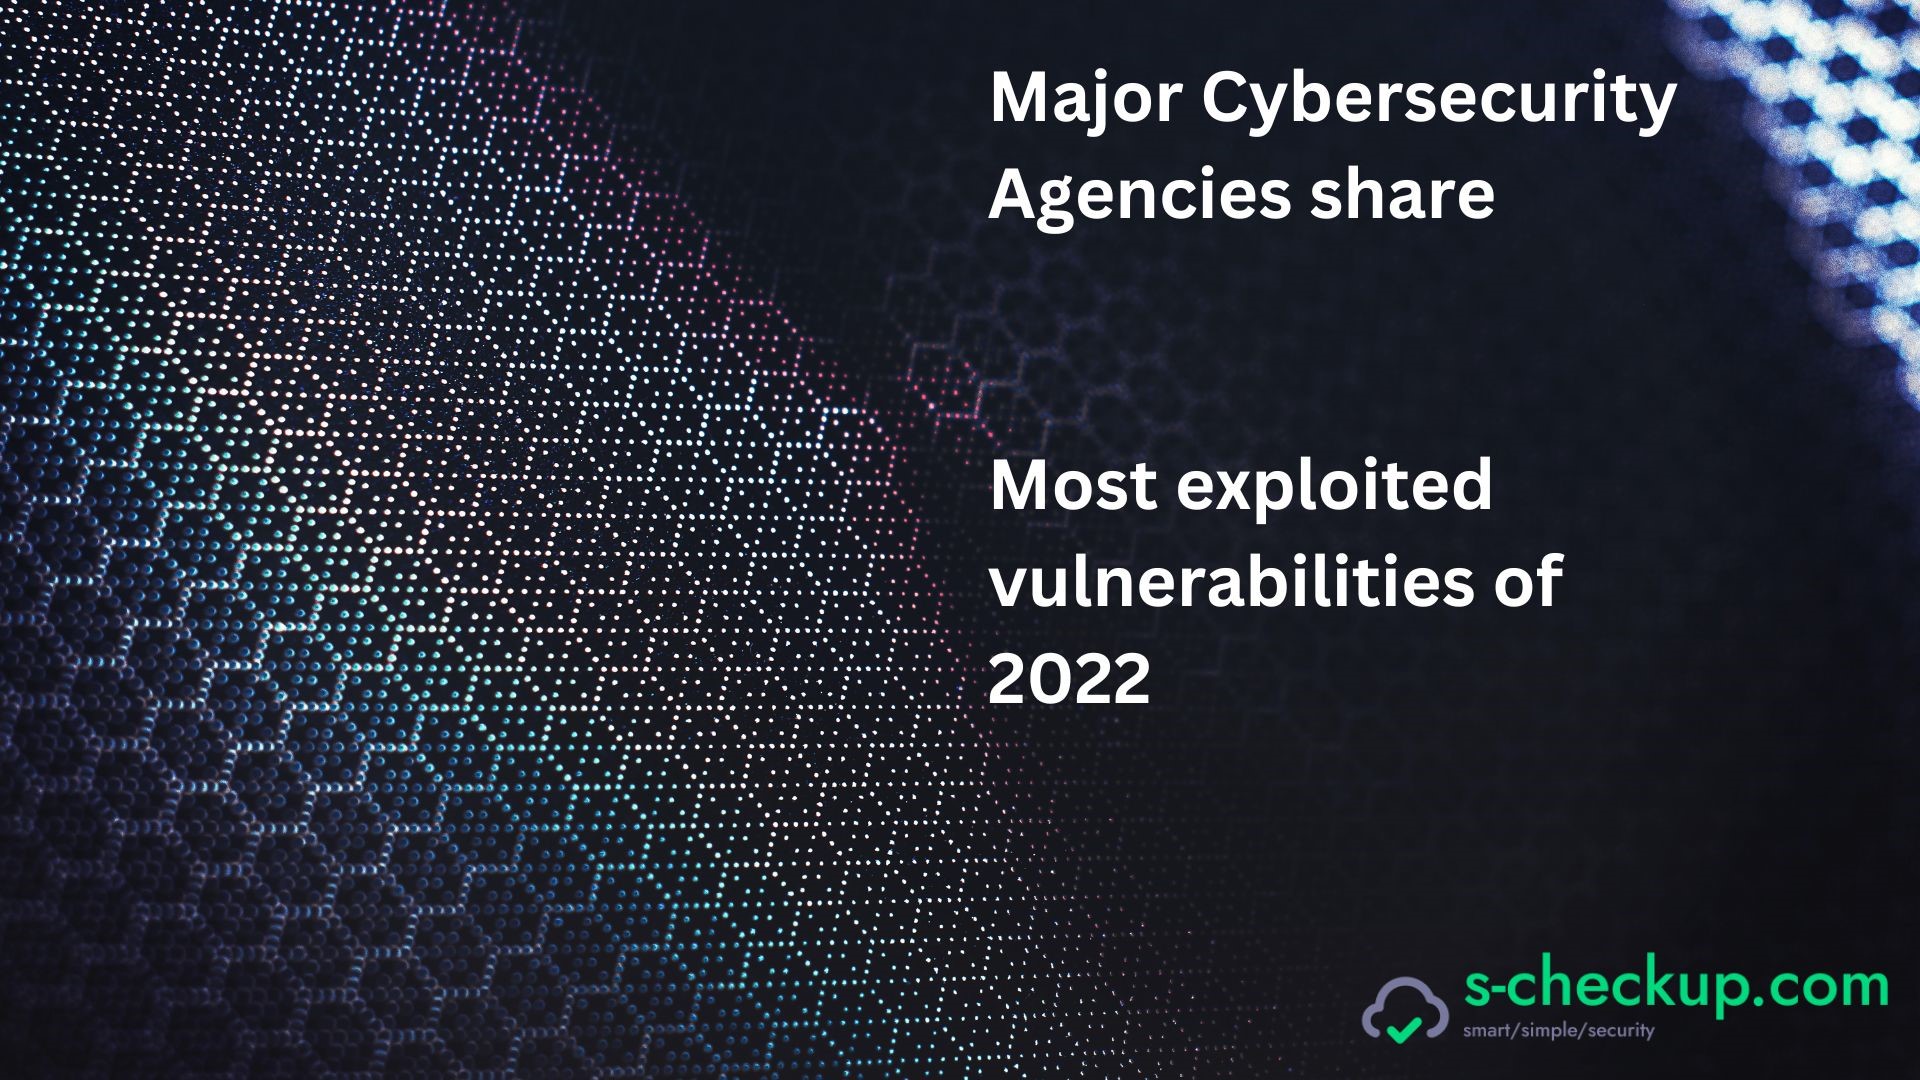 Major Cybersecurity Agencies share the 2022 most exploited vulnerabilities